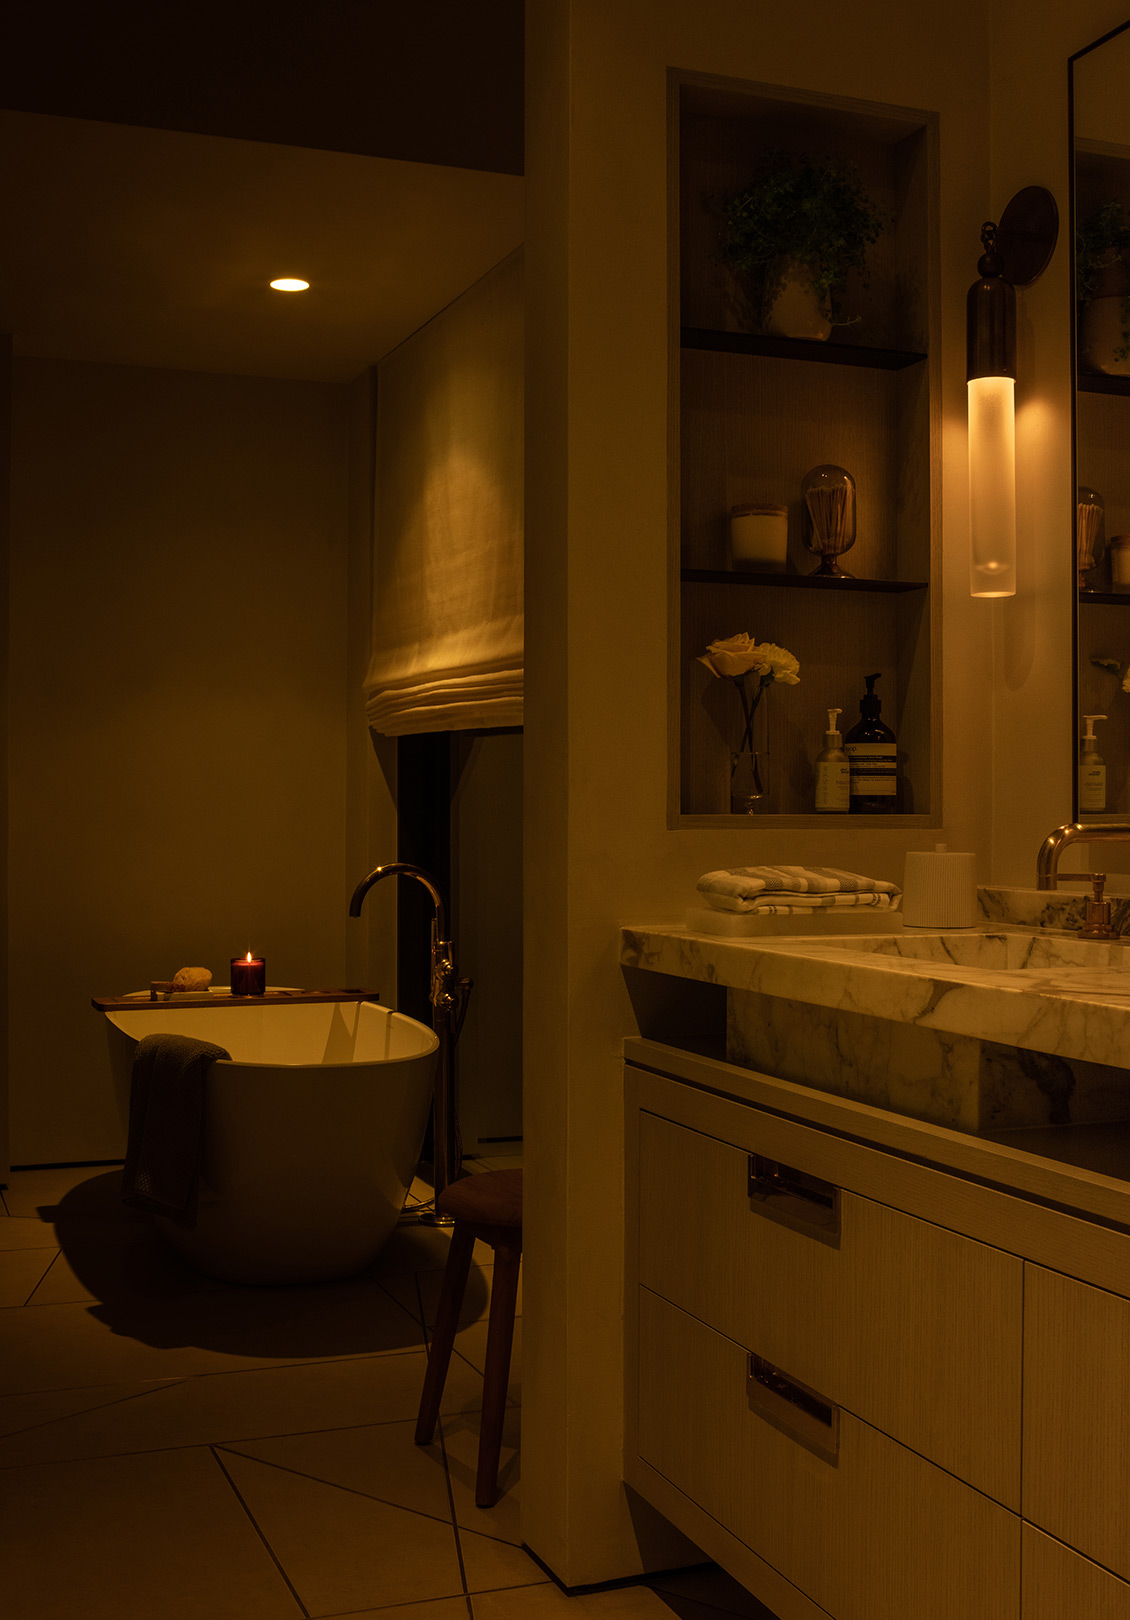 Dimmer switch in bathroom used to tailor light intensity to mood or task.